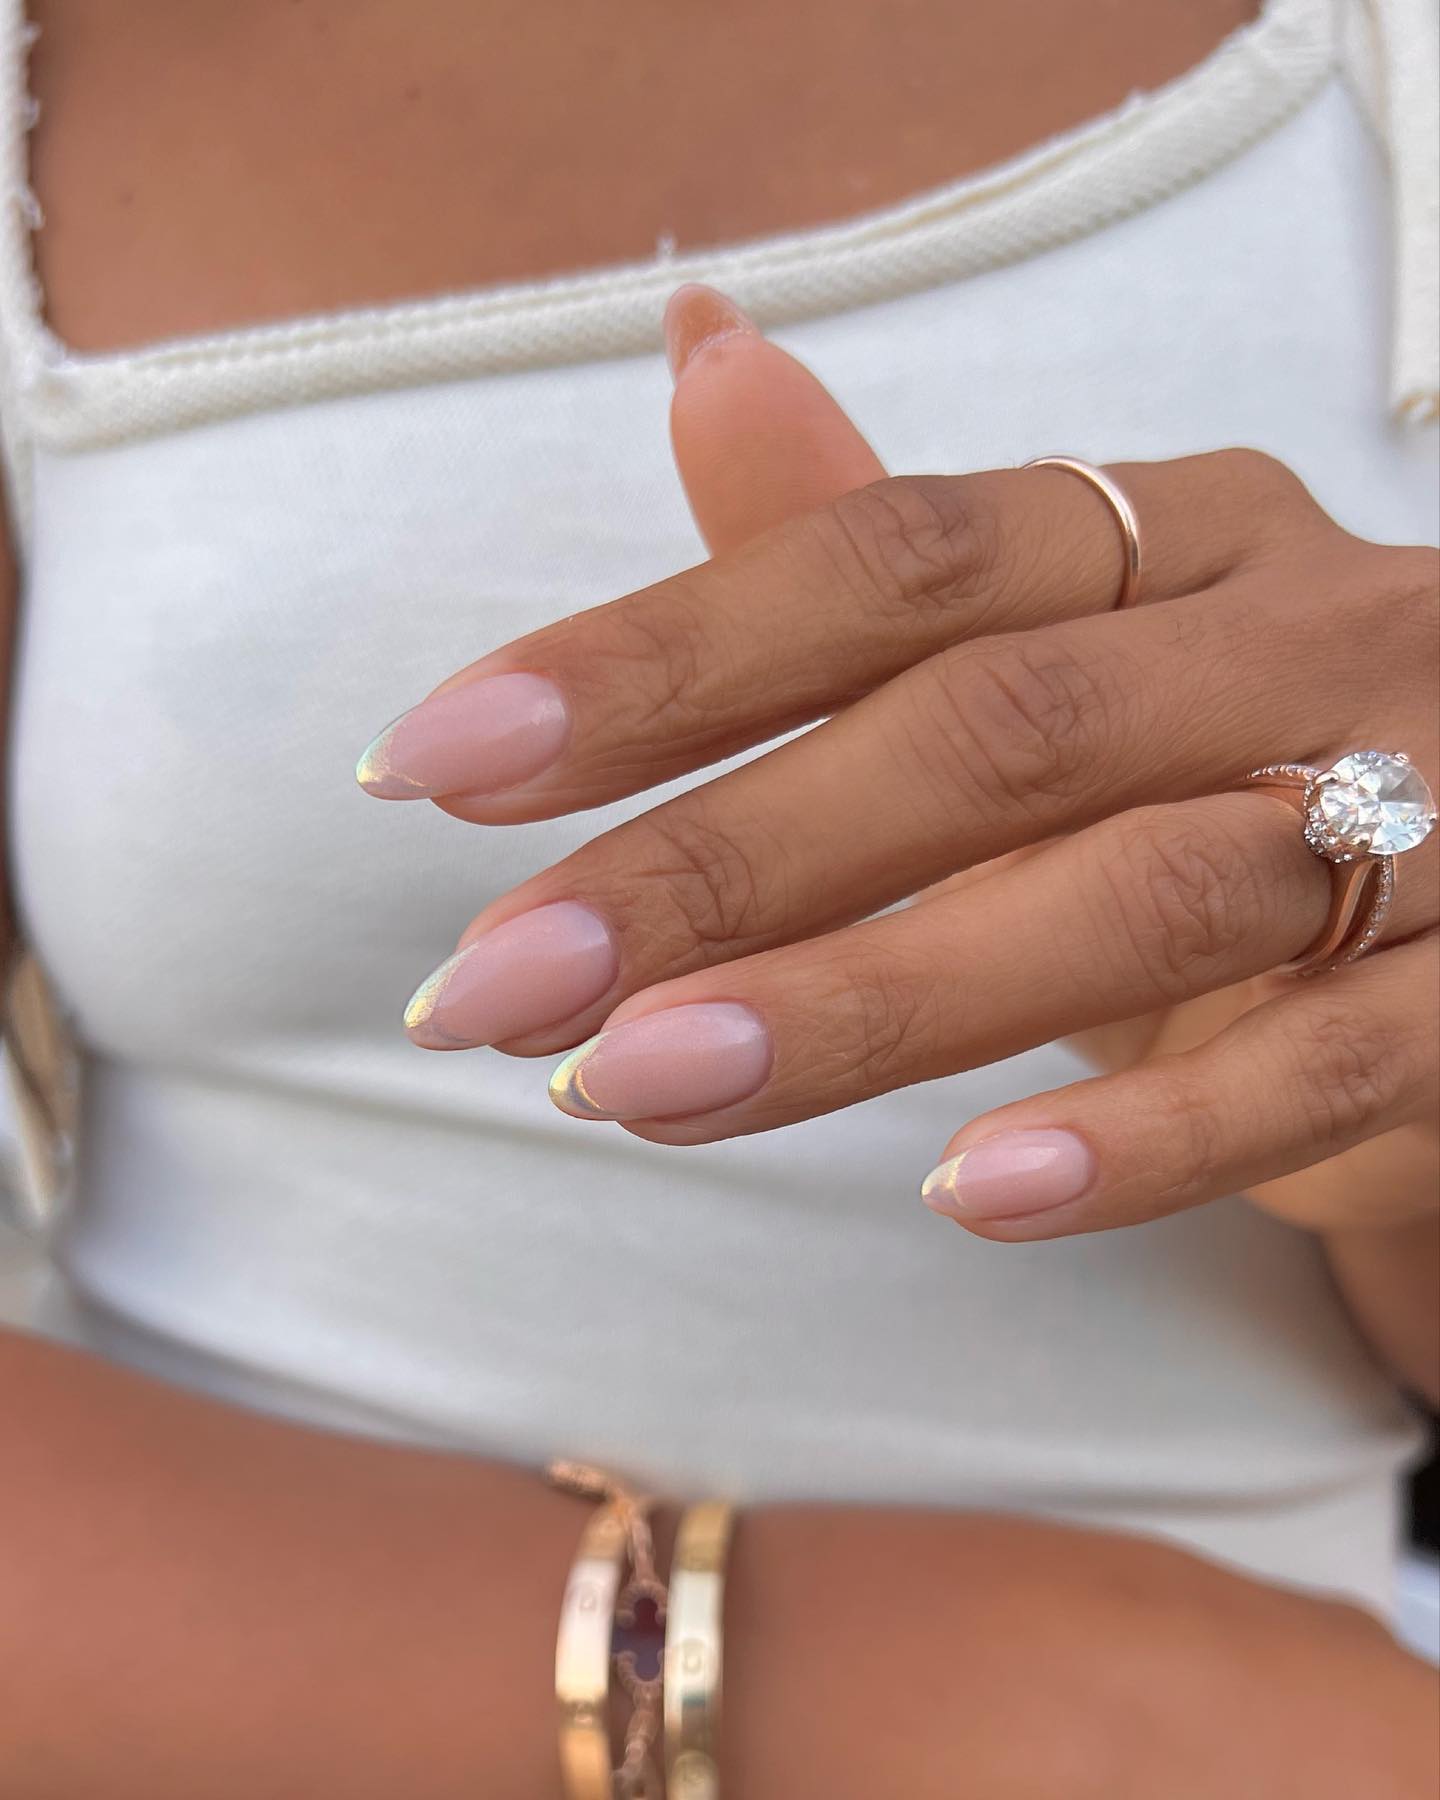 Rochelle Humes chrome French tip manicure